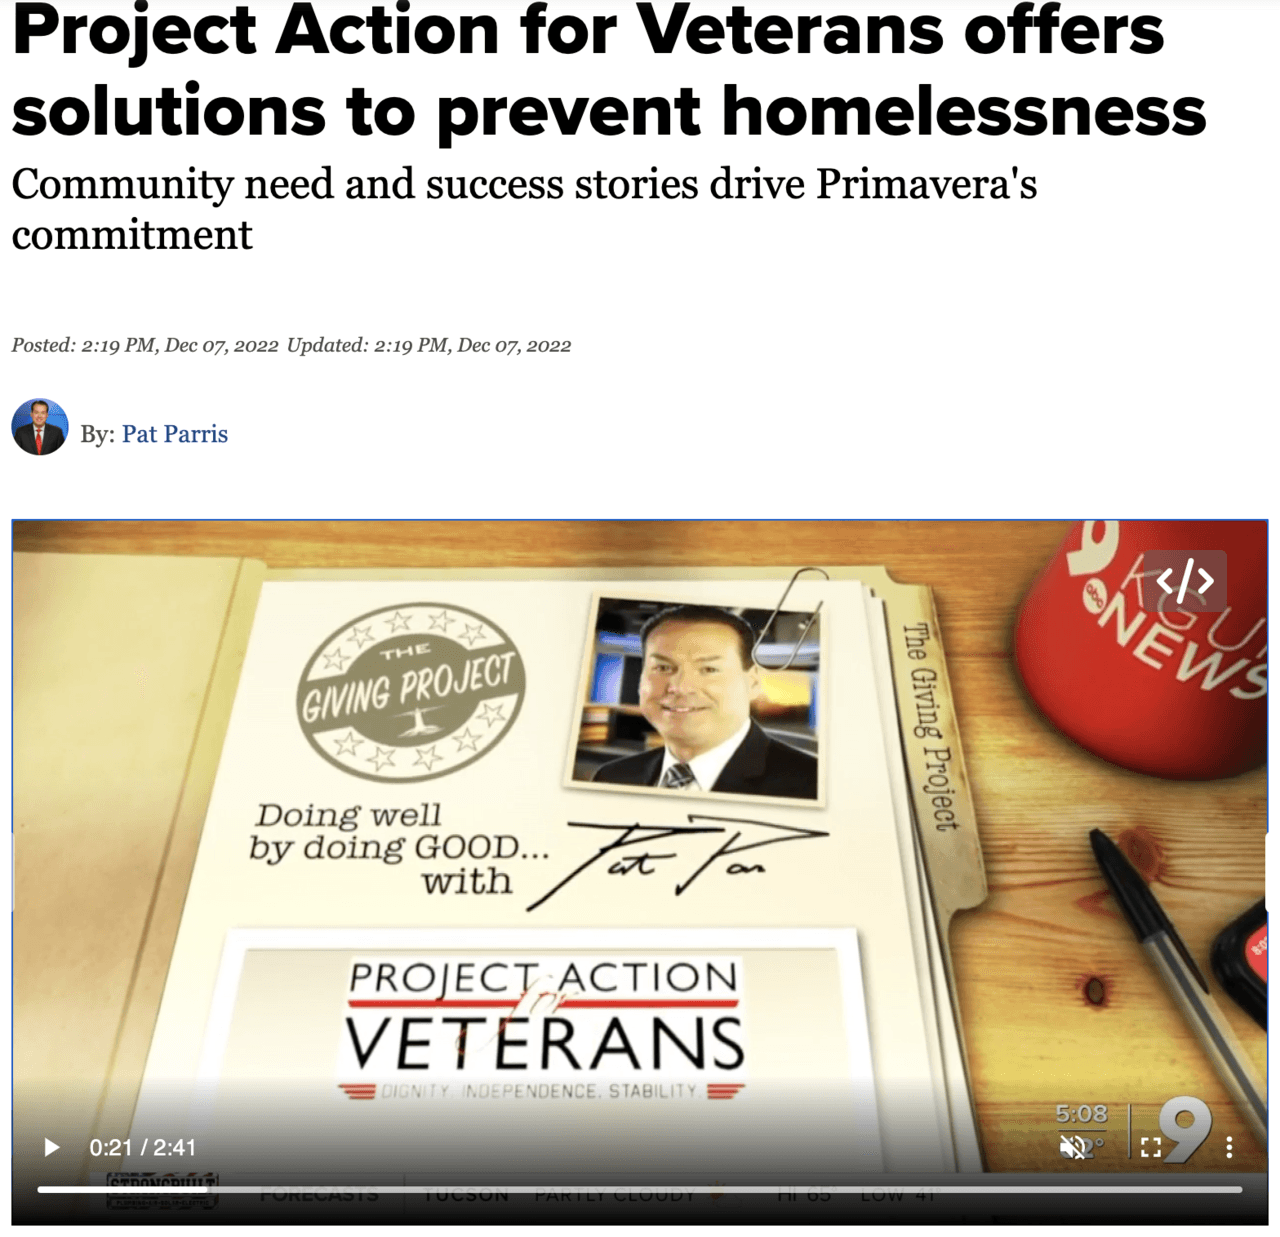 Primavera’s Project Action for Veterans Featured in “The Giving Project - Doing Well by Doing Good”